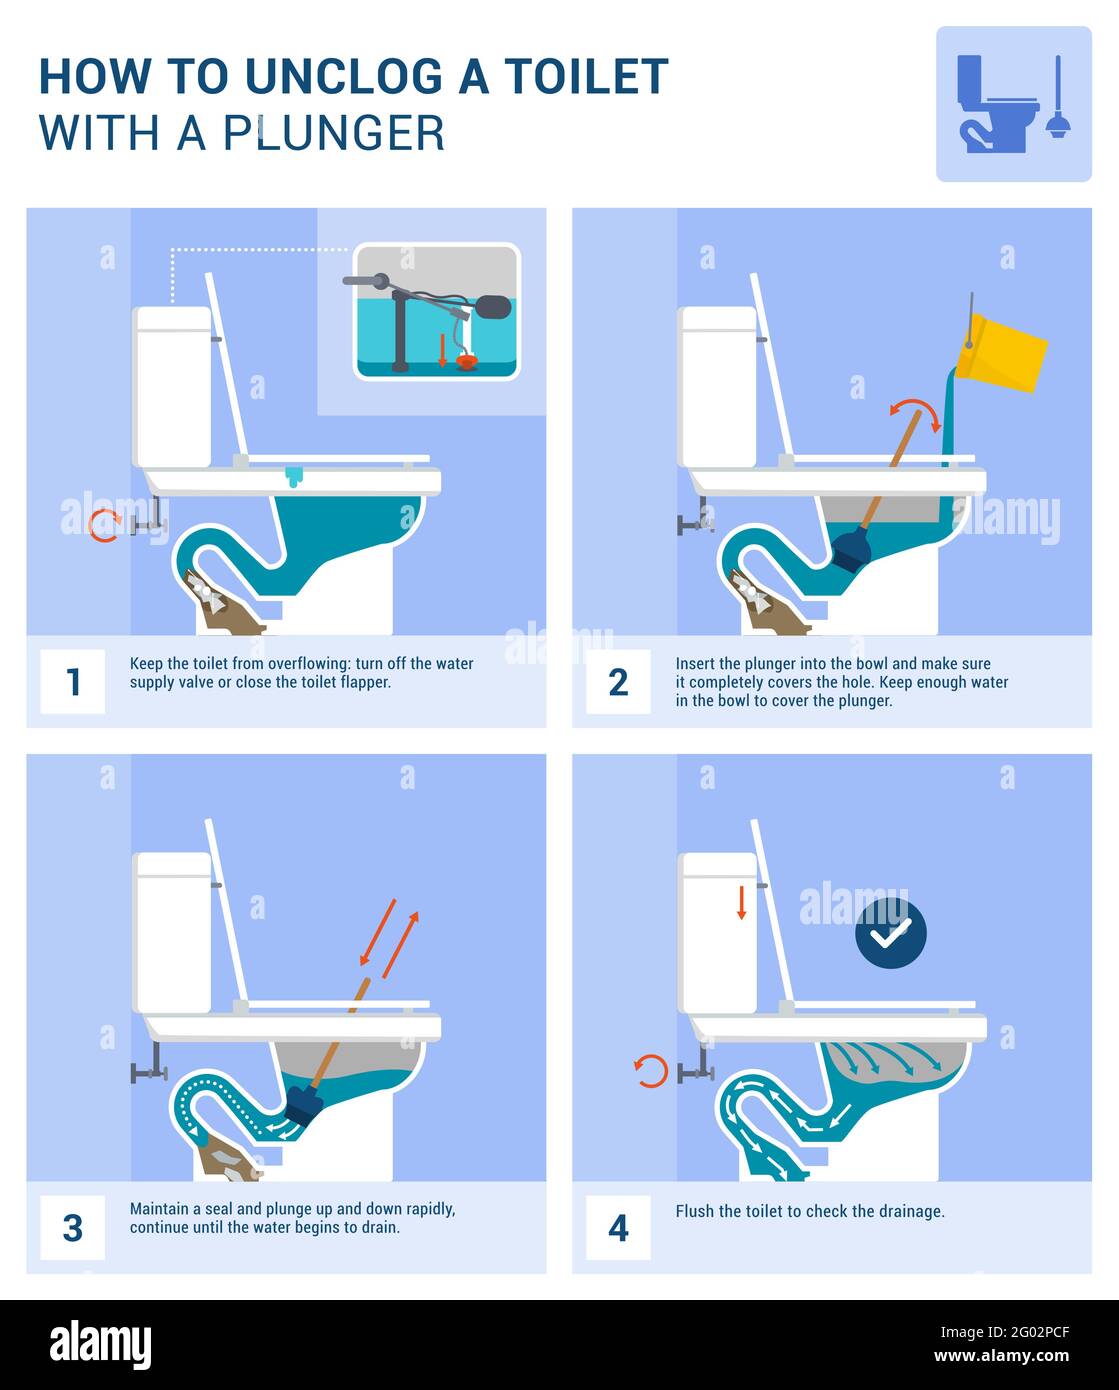 https://c8.alamy.com/comp/2G02PCF/how-to-unclog-a-toilet-with-a-plunger-tutorial-2G02PCF.jpg